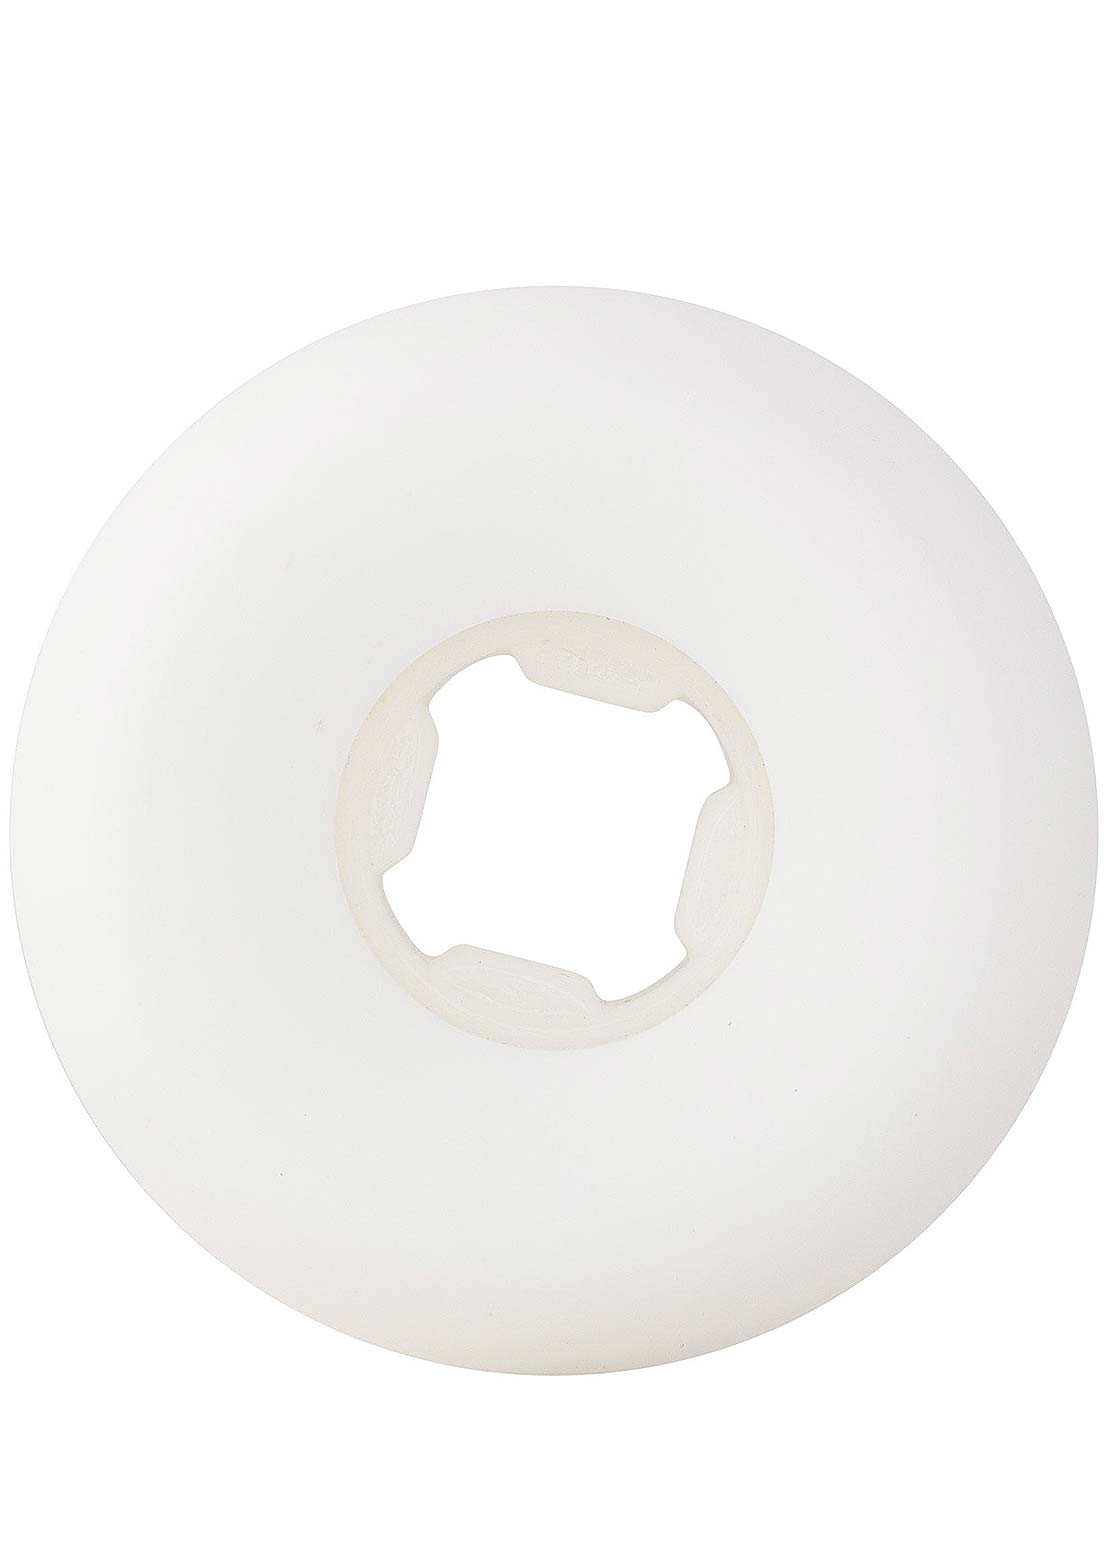 OJ Wheels From Concentrate 101A Skateboard Wheels 52 mm White